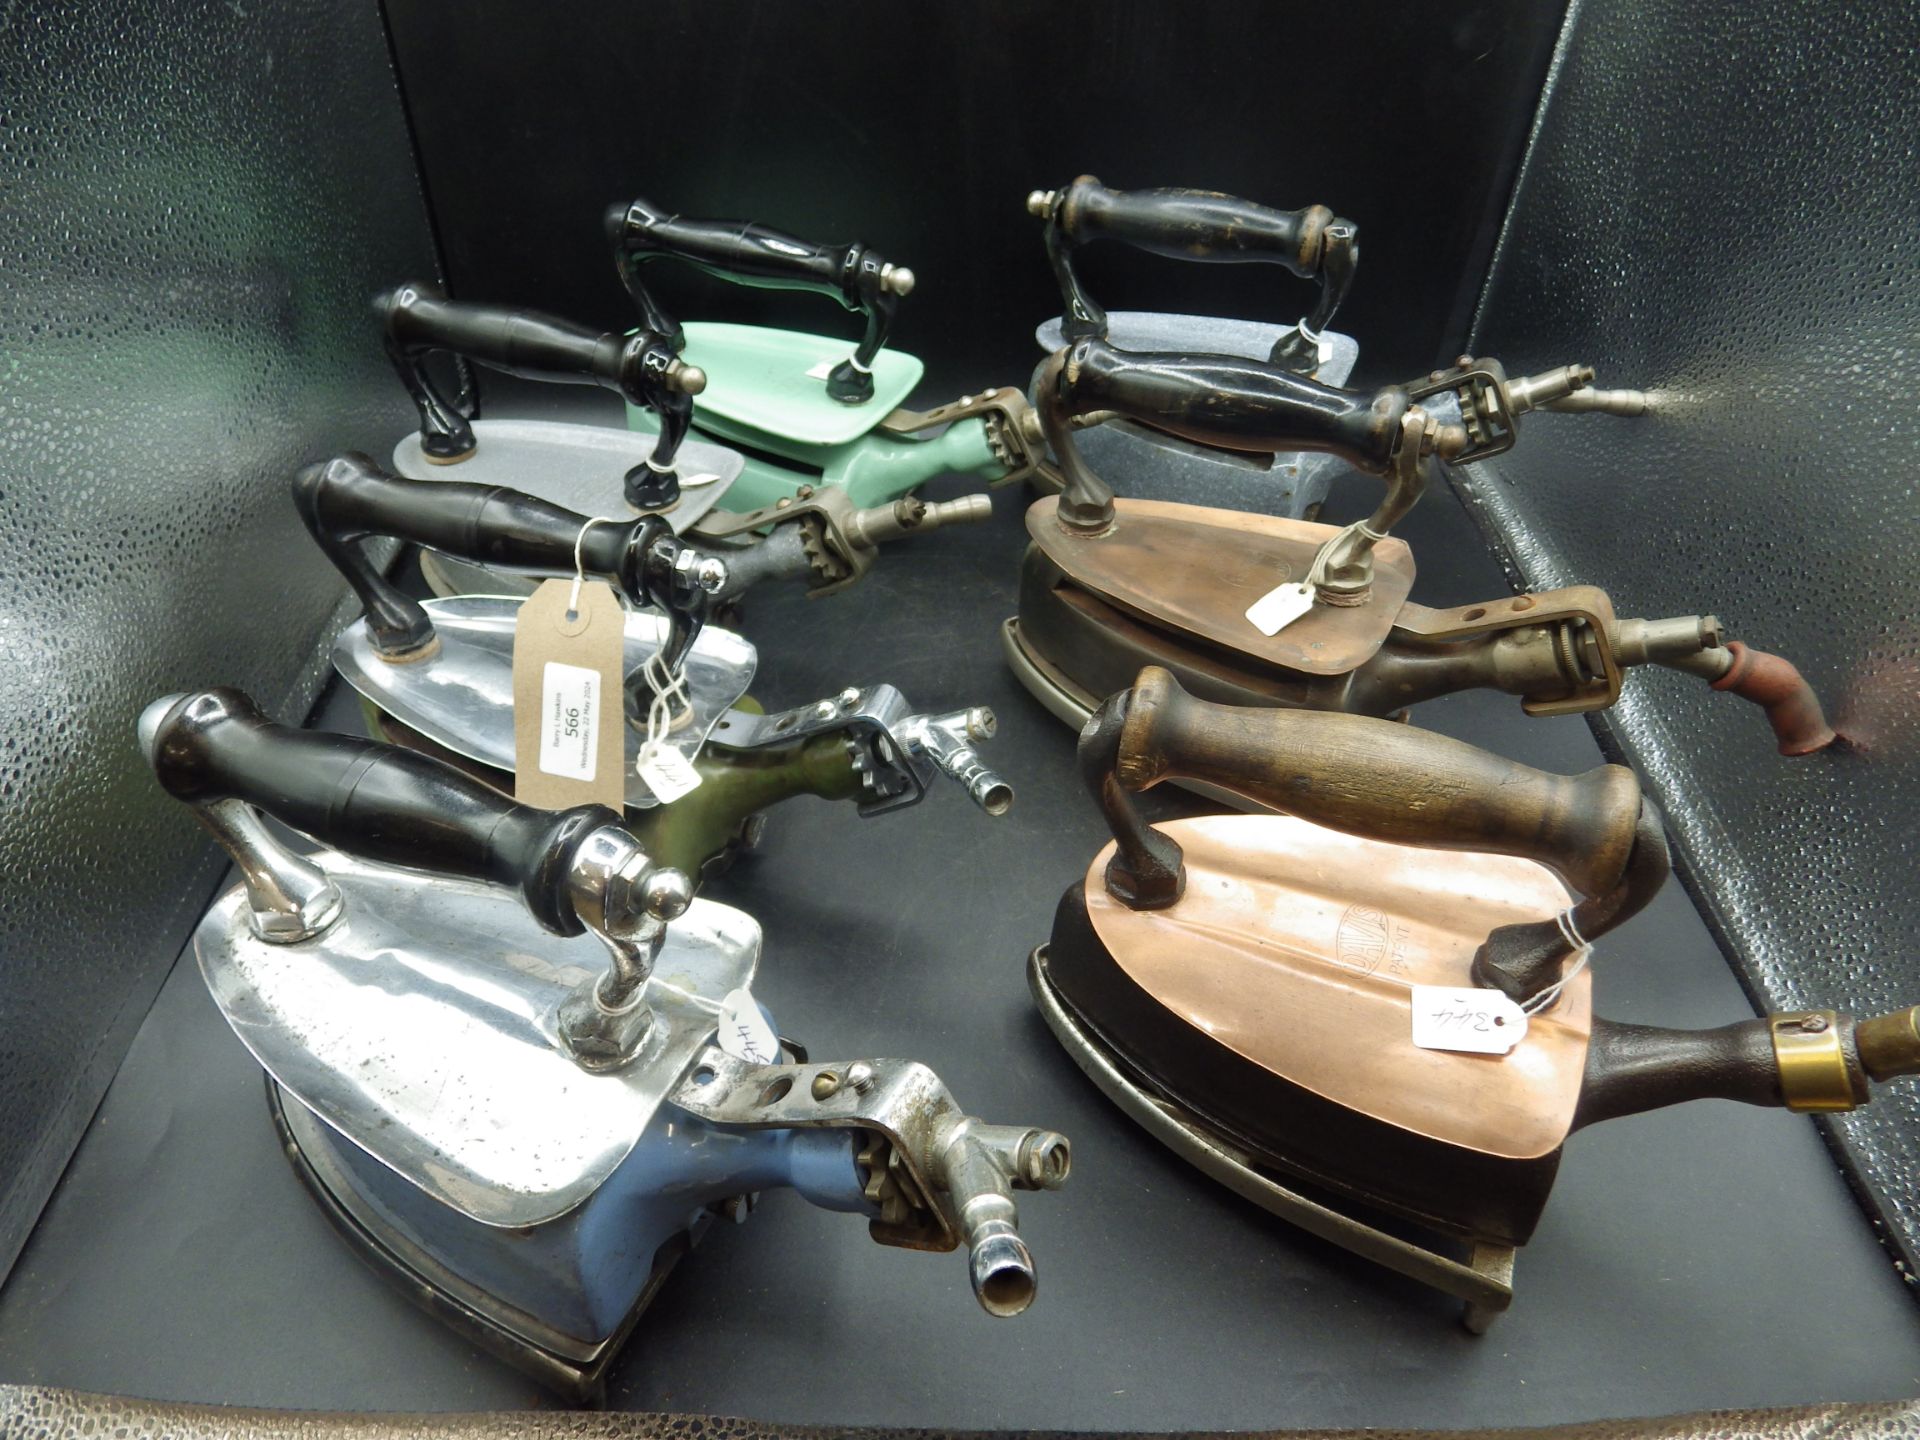 7 assorted Davis gas irons incl an early model with wood handle and flush sole, includes enamel